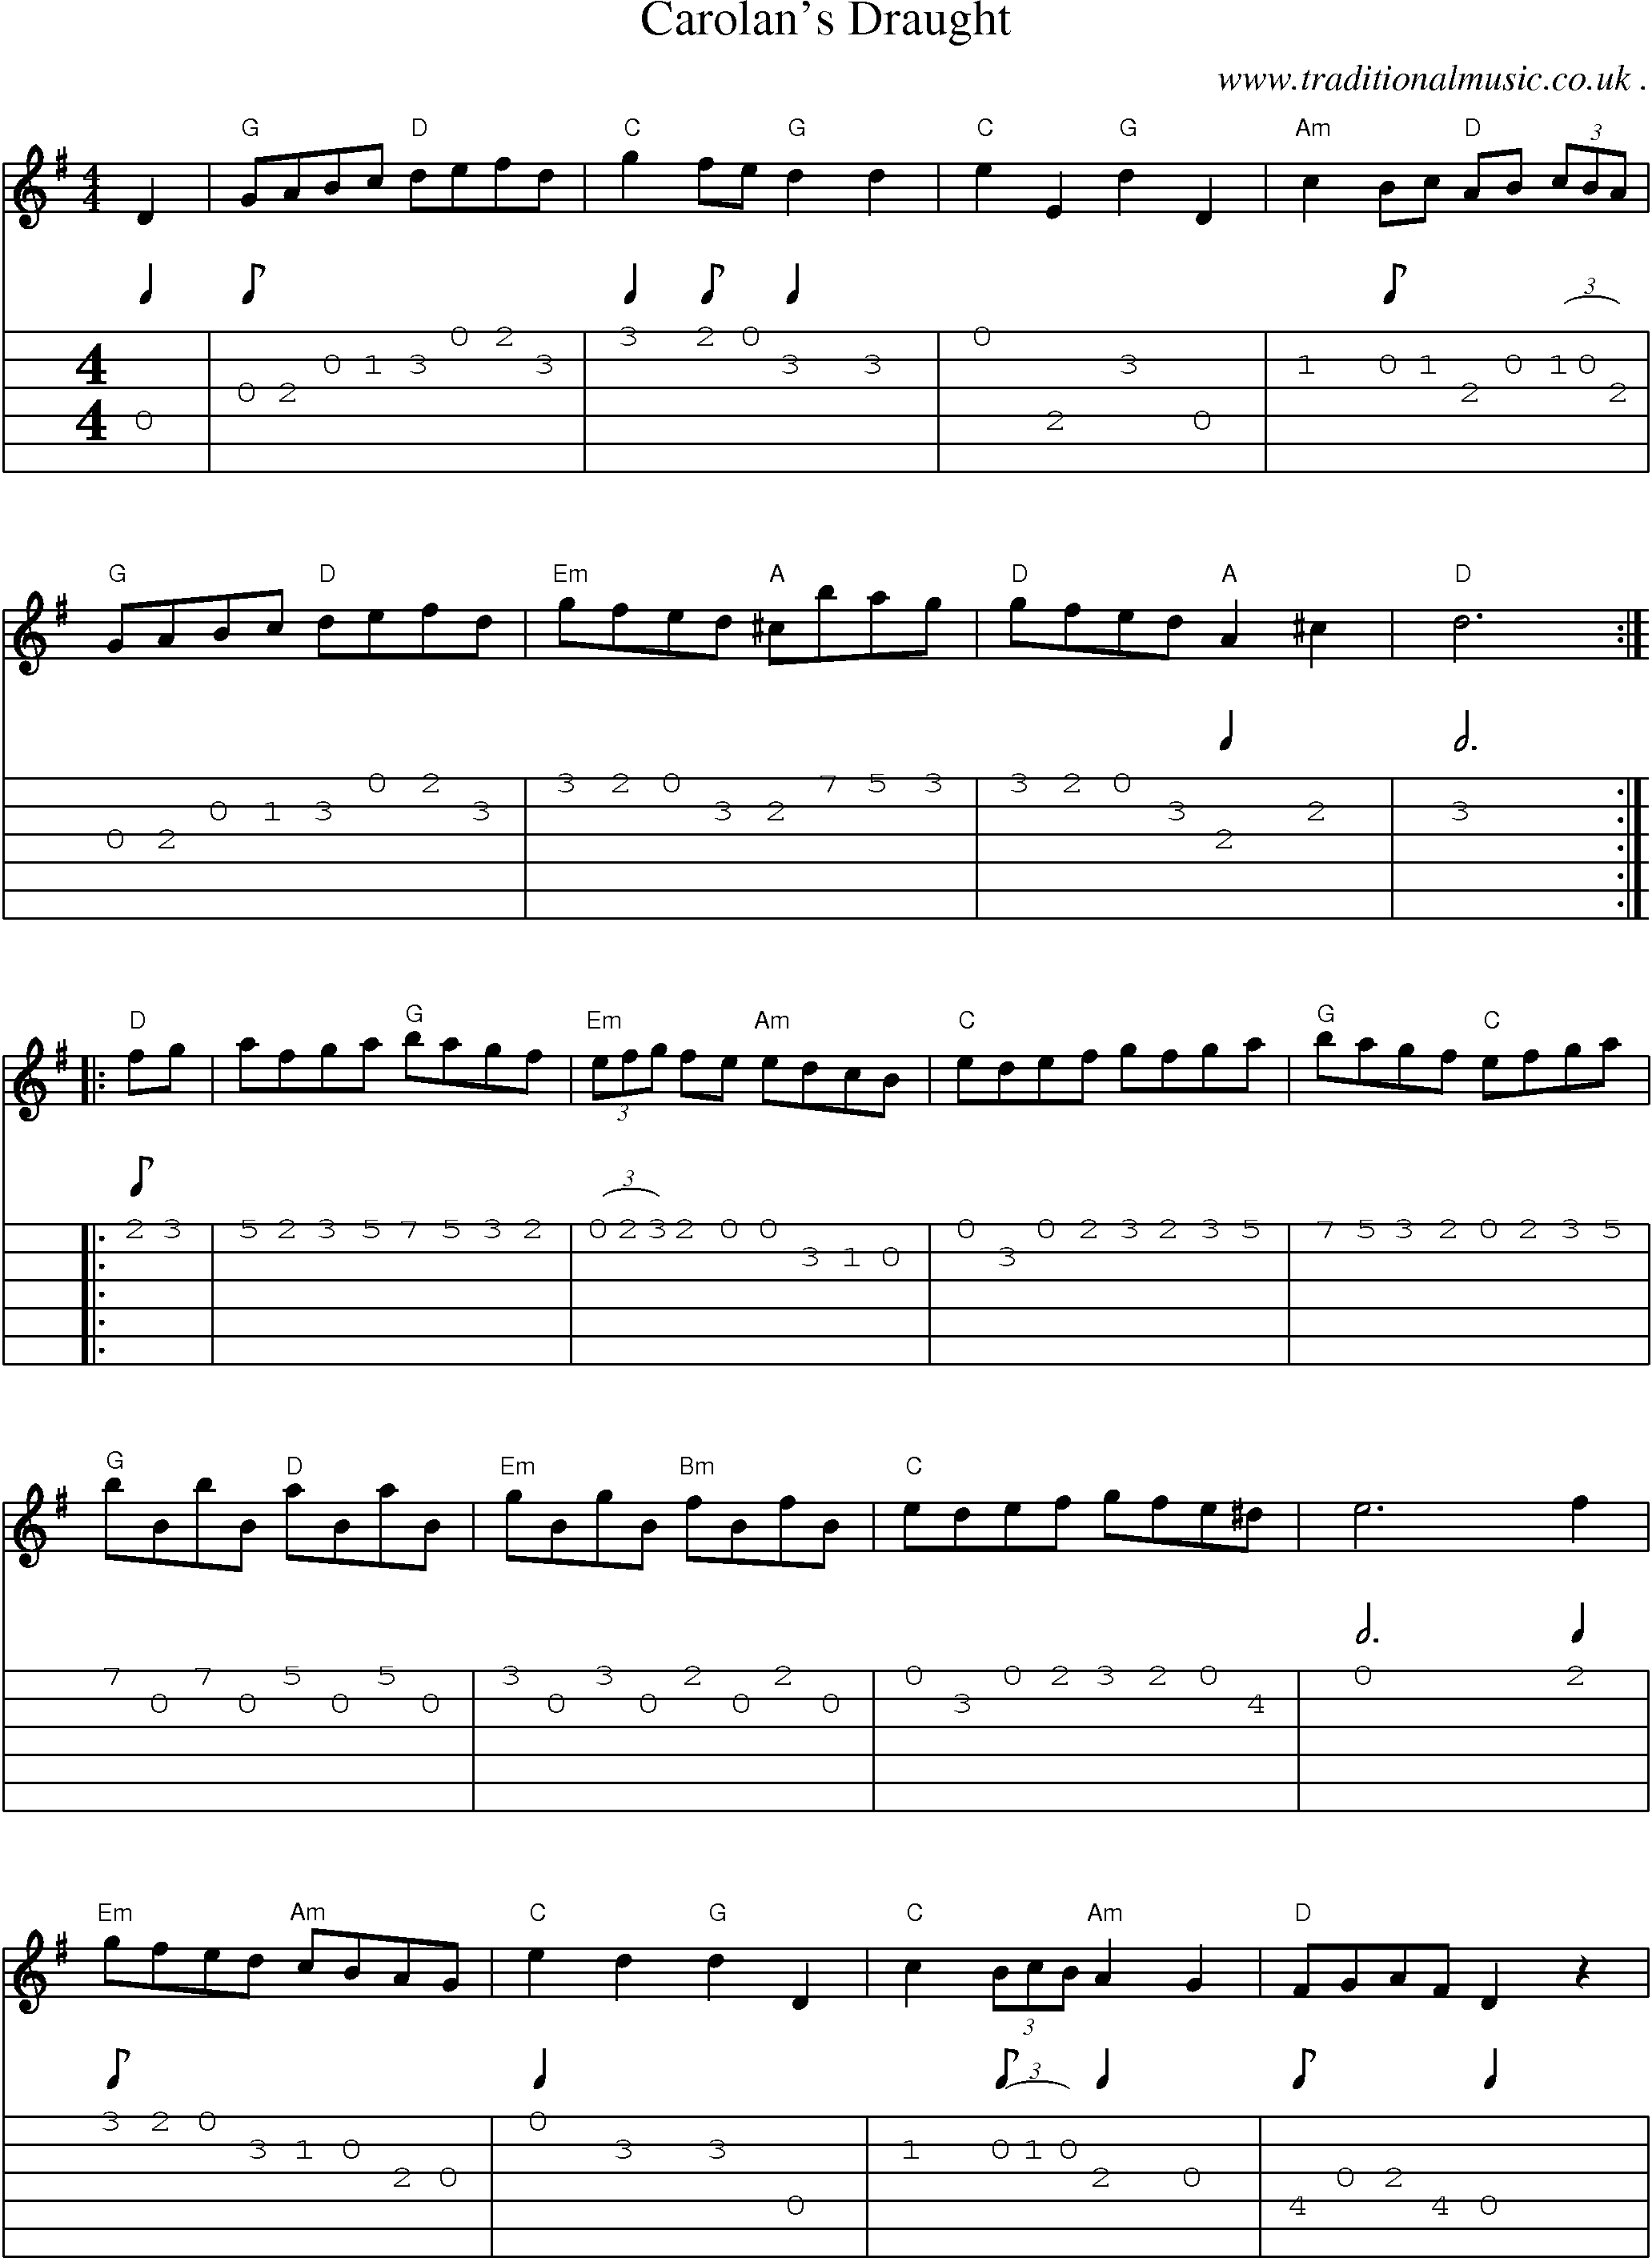 Sheet-music  score, Chords and Guitar Tabs for Carolans Draught